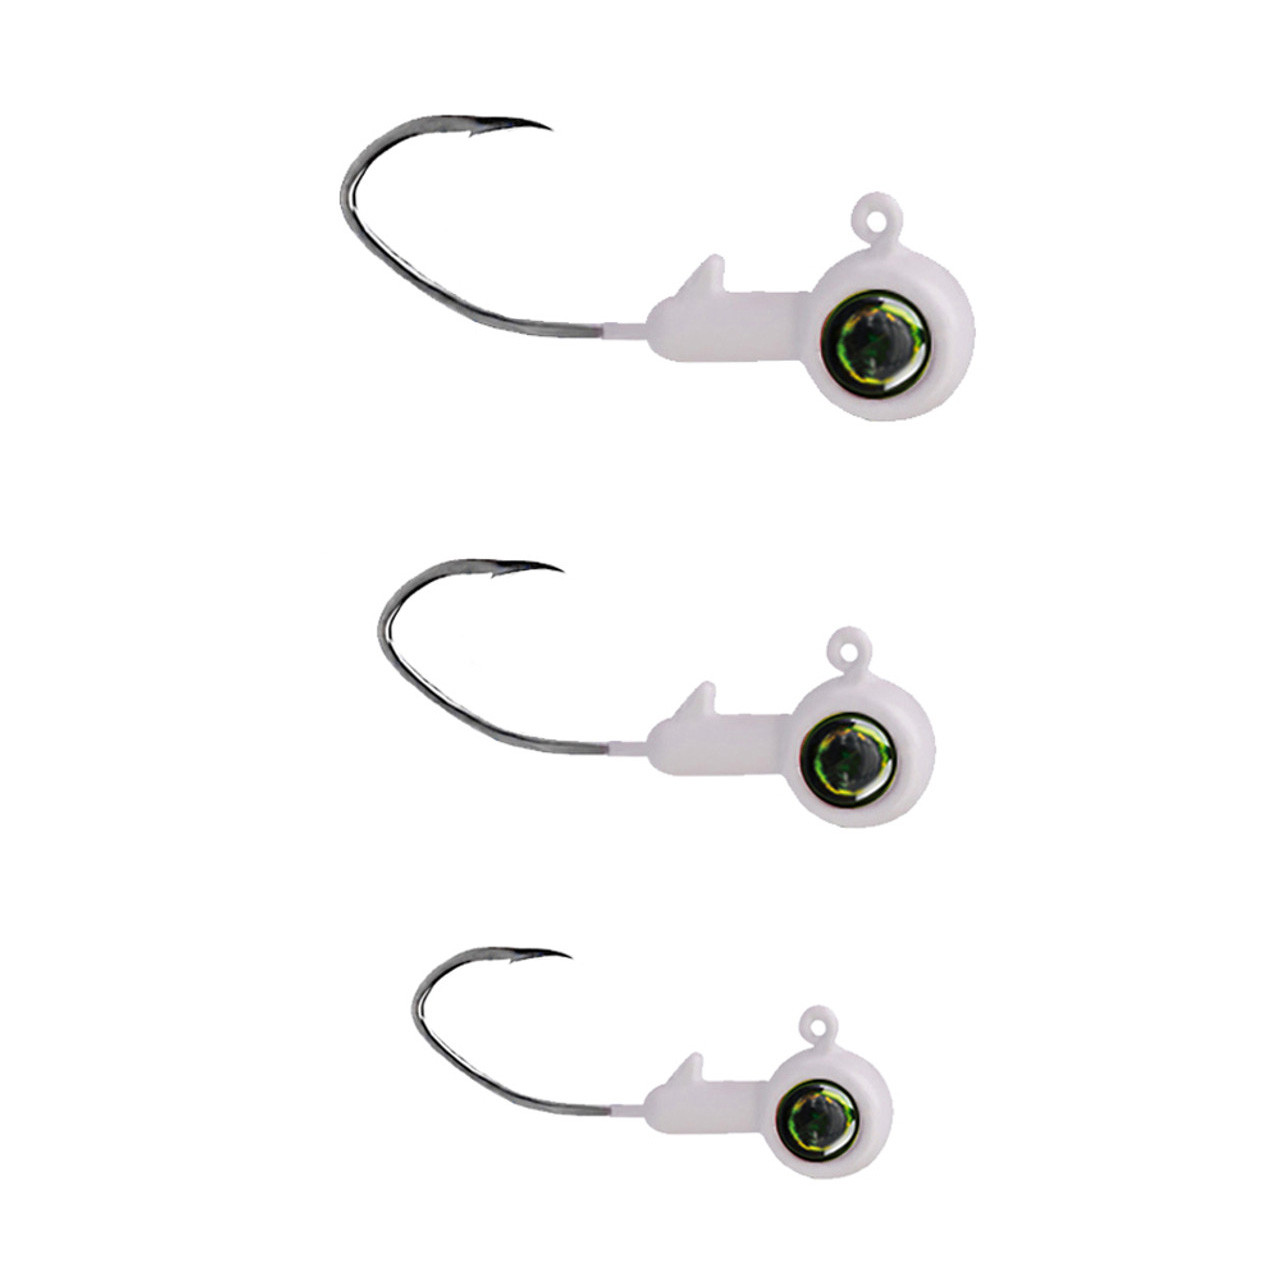 https://cdn11.bigcommerce.com/s-i6ykqoitnd/images/stencil/1280x1280/products/11435/65544/fish-field_crappie_party_jig_head_white__06660.1708040232.jpg?c=1&imbypass=on